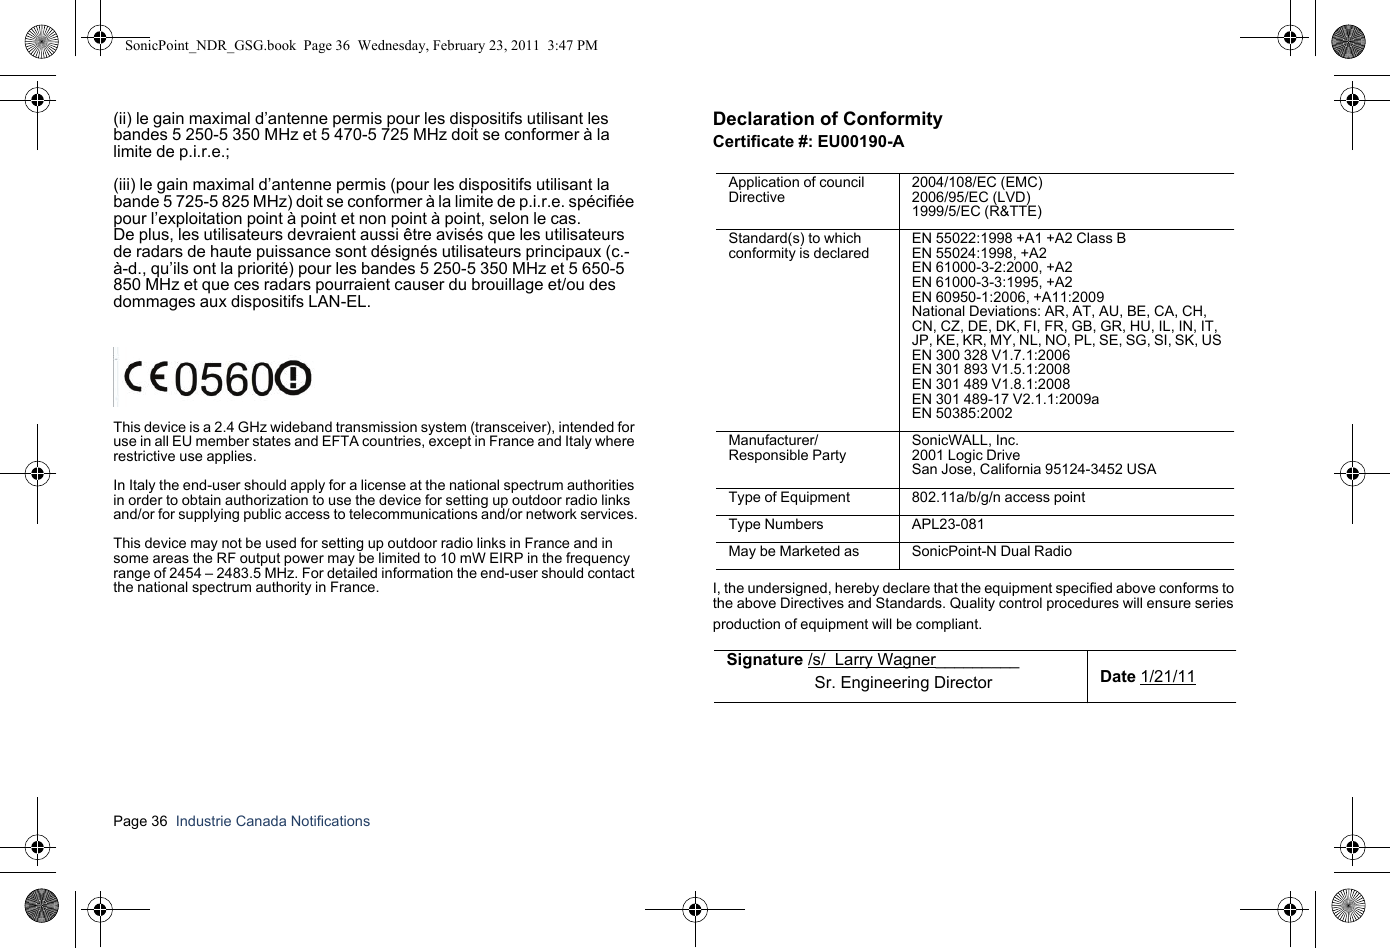 Page 36  Industrie Canada Notifications  (ii) le gain maximal d’antenne permis pour les dispositifs utilisant les bandes 5 250-5 350 MHz et 5 470-5 725 MHz doit se conformer à la limite de p.i.r.e.; (iii) le gain maximal d’antenne permis (pour les dispositifs utilisant la bande 5 725-5 825 MHz) doit se conformer à la limite de p.i.r.e. spécifiée pour l’exploitation point à point et non point à point, selon le cas.De plus, les utilisateurs devraient aussi être avisés que les utilisateurs de radars de haute puissance sont désignés utilisateurs principaux (c.-à-d., qu’ils ont la priorité) pour les bandes 5 250-5 350 MHz et 5 650-5 850 MHz et que ces radars pourraient causer du brouillage et/ou des dommages aux dispositifs LAN-EL.This device is a 2.4 GHz wideband transmission system (transceiver), intended for use in all EU member states and EFTA countries, except in France and Italy where restrictive use applies.In Italy the end-user should apply for a license at the national spectrum authorities in order to obtain authorization to use the device for setting up outdoor radio links and/or for supplying public access to telecommunications and/or network services.This device may not be used for setting up outdoor radio links in France and in some areas the RF output power may be limited to 10 mW EIRP in the frequency range of 2454 – 2483.5 MHz. For detailed information the end-user should contact the national spectrum authority in France.Declaration of ConformityCertificate #: EU00190-AI, the undersigned, hereby declare that the equipment specified above conforms to the above Directives and Standards. Quality control procedures will ensure series production of equipment will be compliant.Application of council Directive2004/108/EC (EMC) 2006/95/EC (LVD)1999/5/EC (R&amp;TTE)Standard(s) to which conformity is declaredEN 55022:1998 +A1 +A2 Class BEN 55024:1998, +A2EN 61000-3-2:2000, +A2EN 61000-3-3:1995, +A2EN 60950-1:2006, +A11:2009National Deviations: AR, AT, AU, BE, CA, CH,CN, CZ, DE, DK, FI, FR, GB, GR, HU, IL, IN, IT,JP, KE, KR, MY, NL, NO, PL, SE, SG, SI, SK, USEN 300 328 V1.7.1:2006EN 301 893 V1.5.1:2008EN 301 489 V1.8.1:2008EN 301 489-17 V2.1.1:2009aEN 50385:2002Manufacturer/Responsible PartySonicWALL, Inc.2001 Logic DriveSan Jose, California 95124-3452 USAType of Equipment 802.11a/b/g/n access pointType Numbers APL23-081May be Marketed as SonicPoint-N Dual RadioSignature /s/  Larry Wagner_________                   Sr. Engineering Director Date 1/21/11SonicPoint_NDR_GSG.book  Page 36  Wednesday, February 23, 2011  3:47 PM